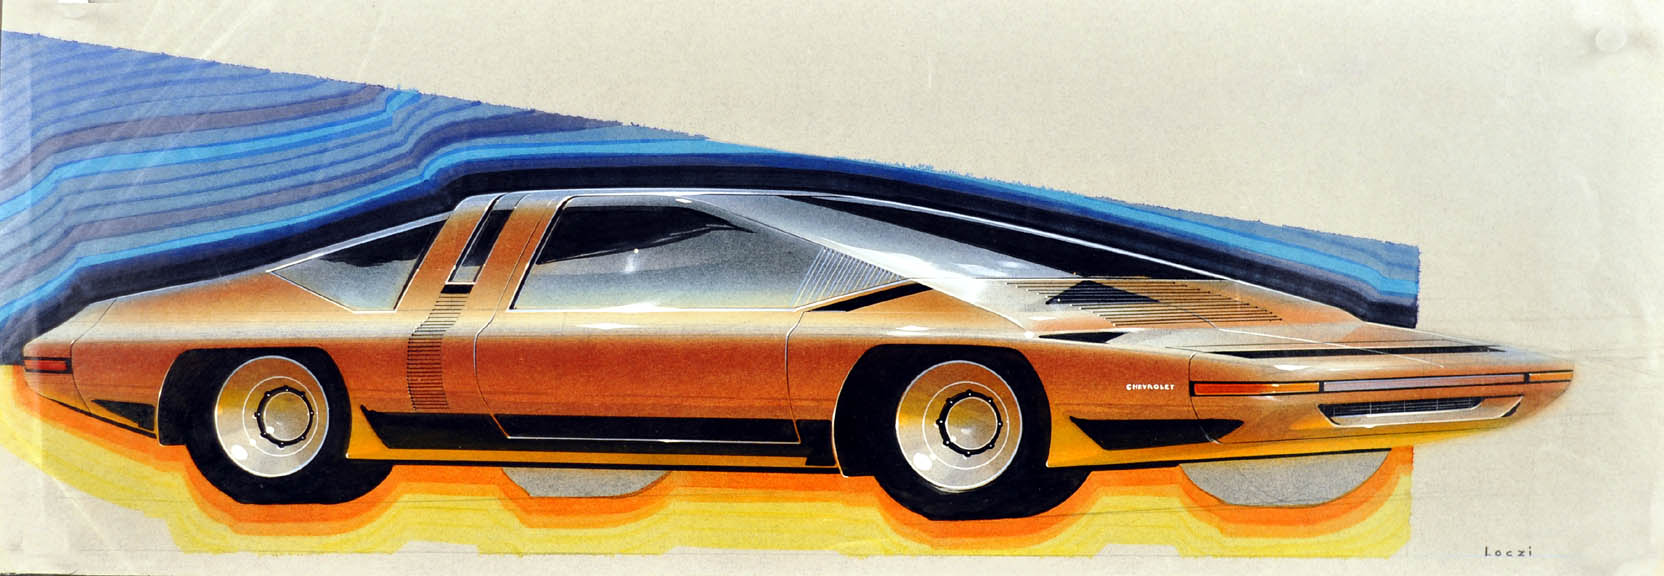 Chevy Concept Design by Loczi 